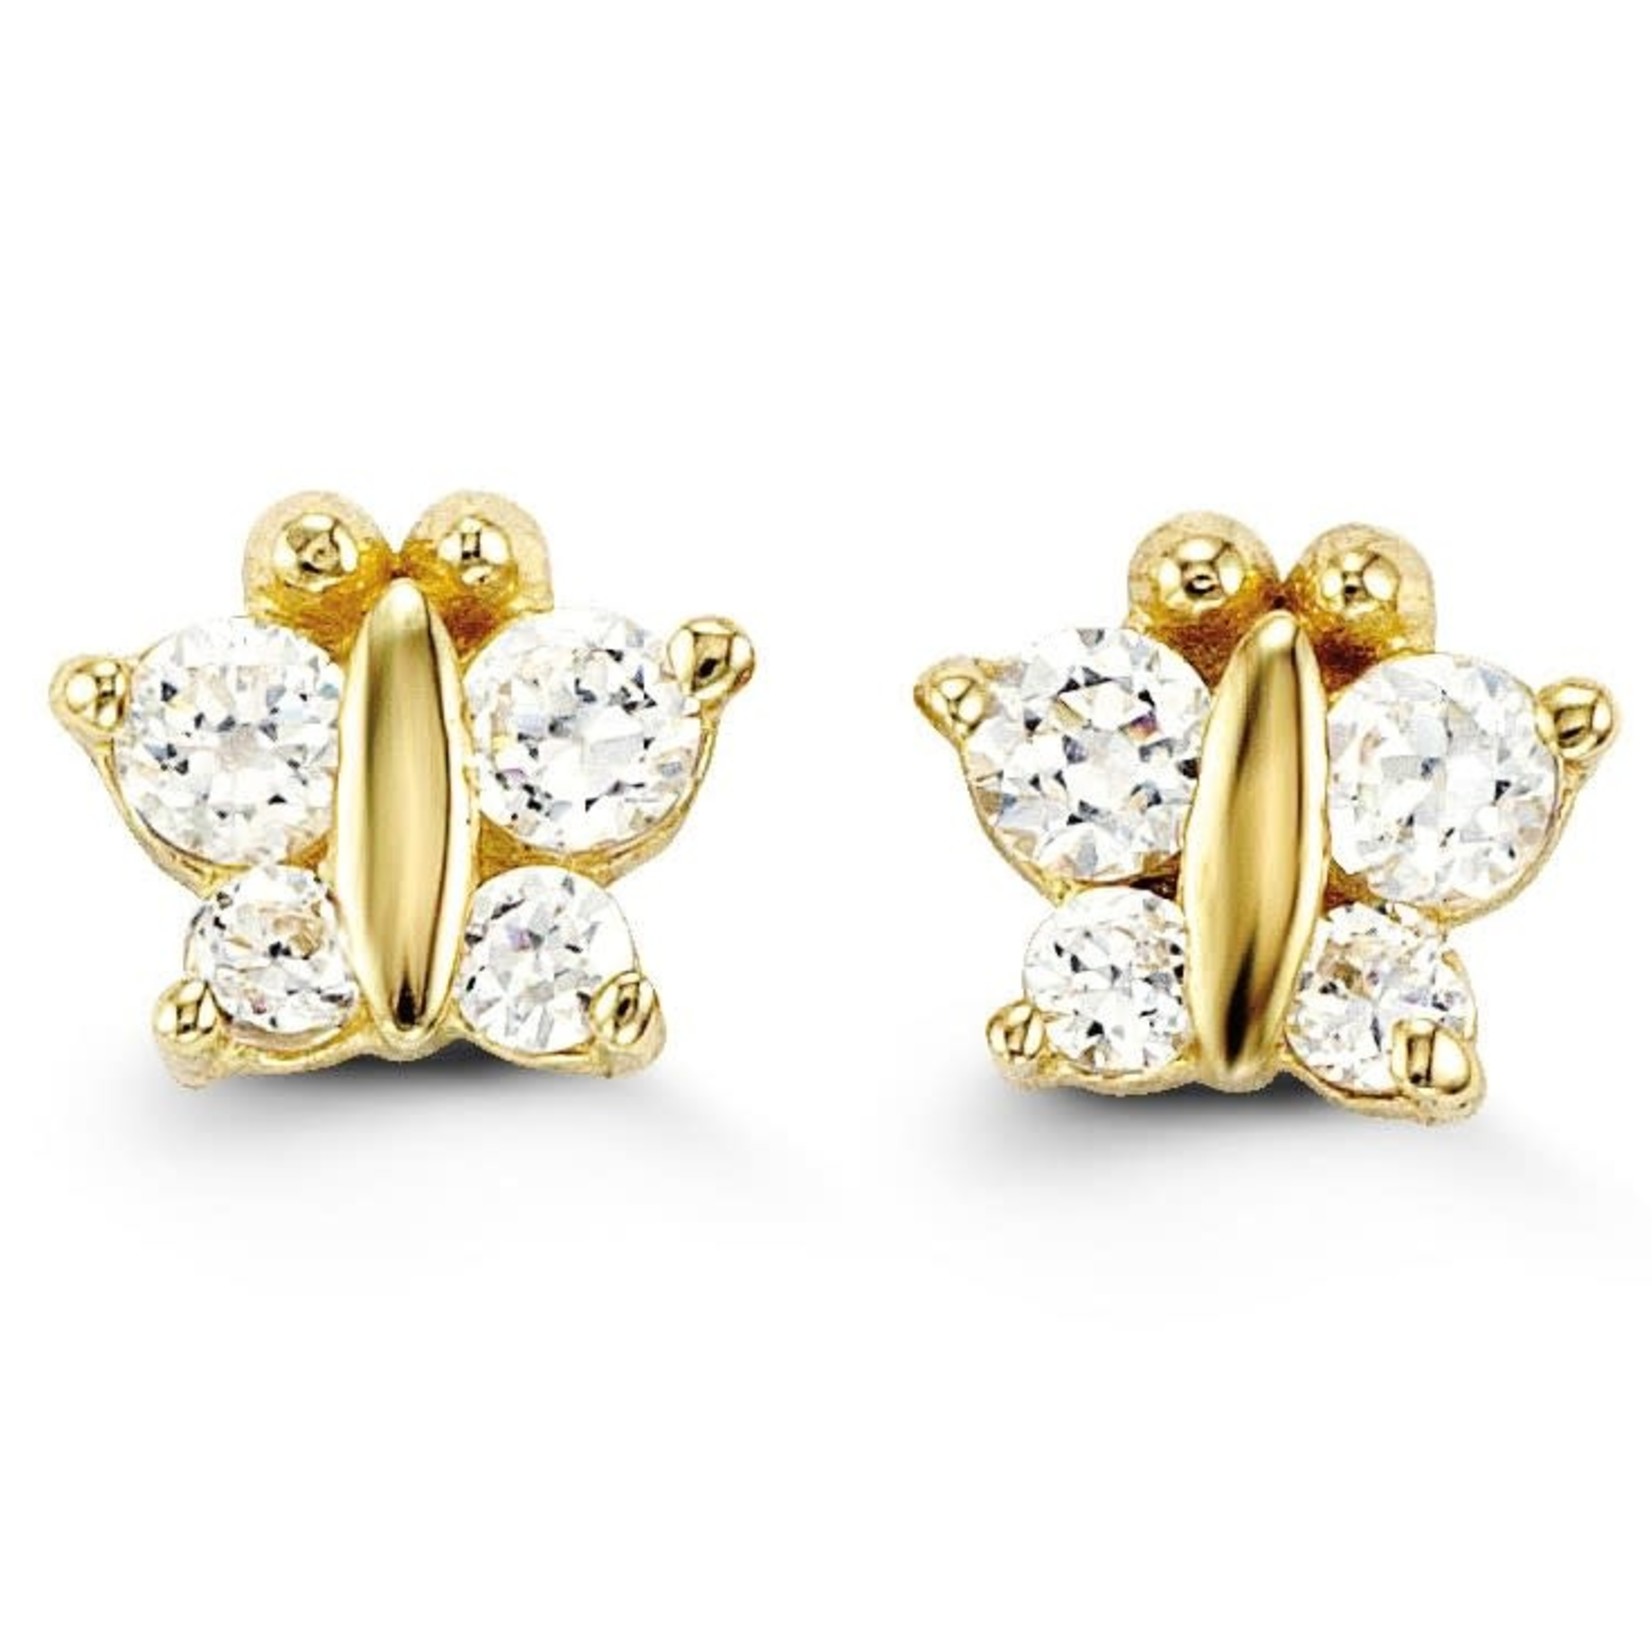 Bella Baby Collection 14K YG White Cubic Zirconia Baby Earrings